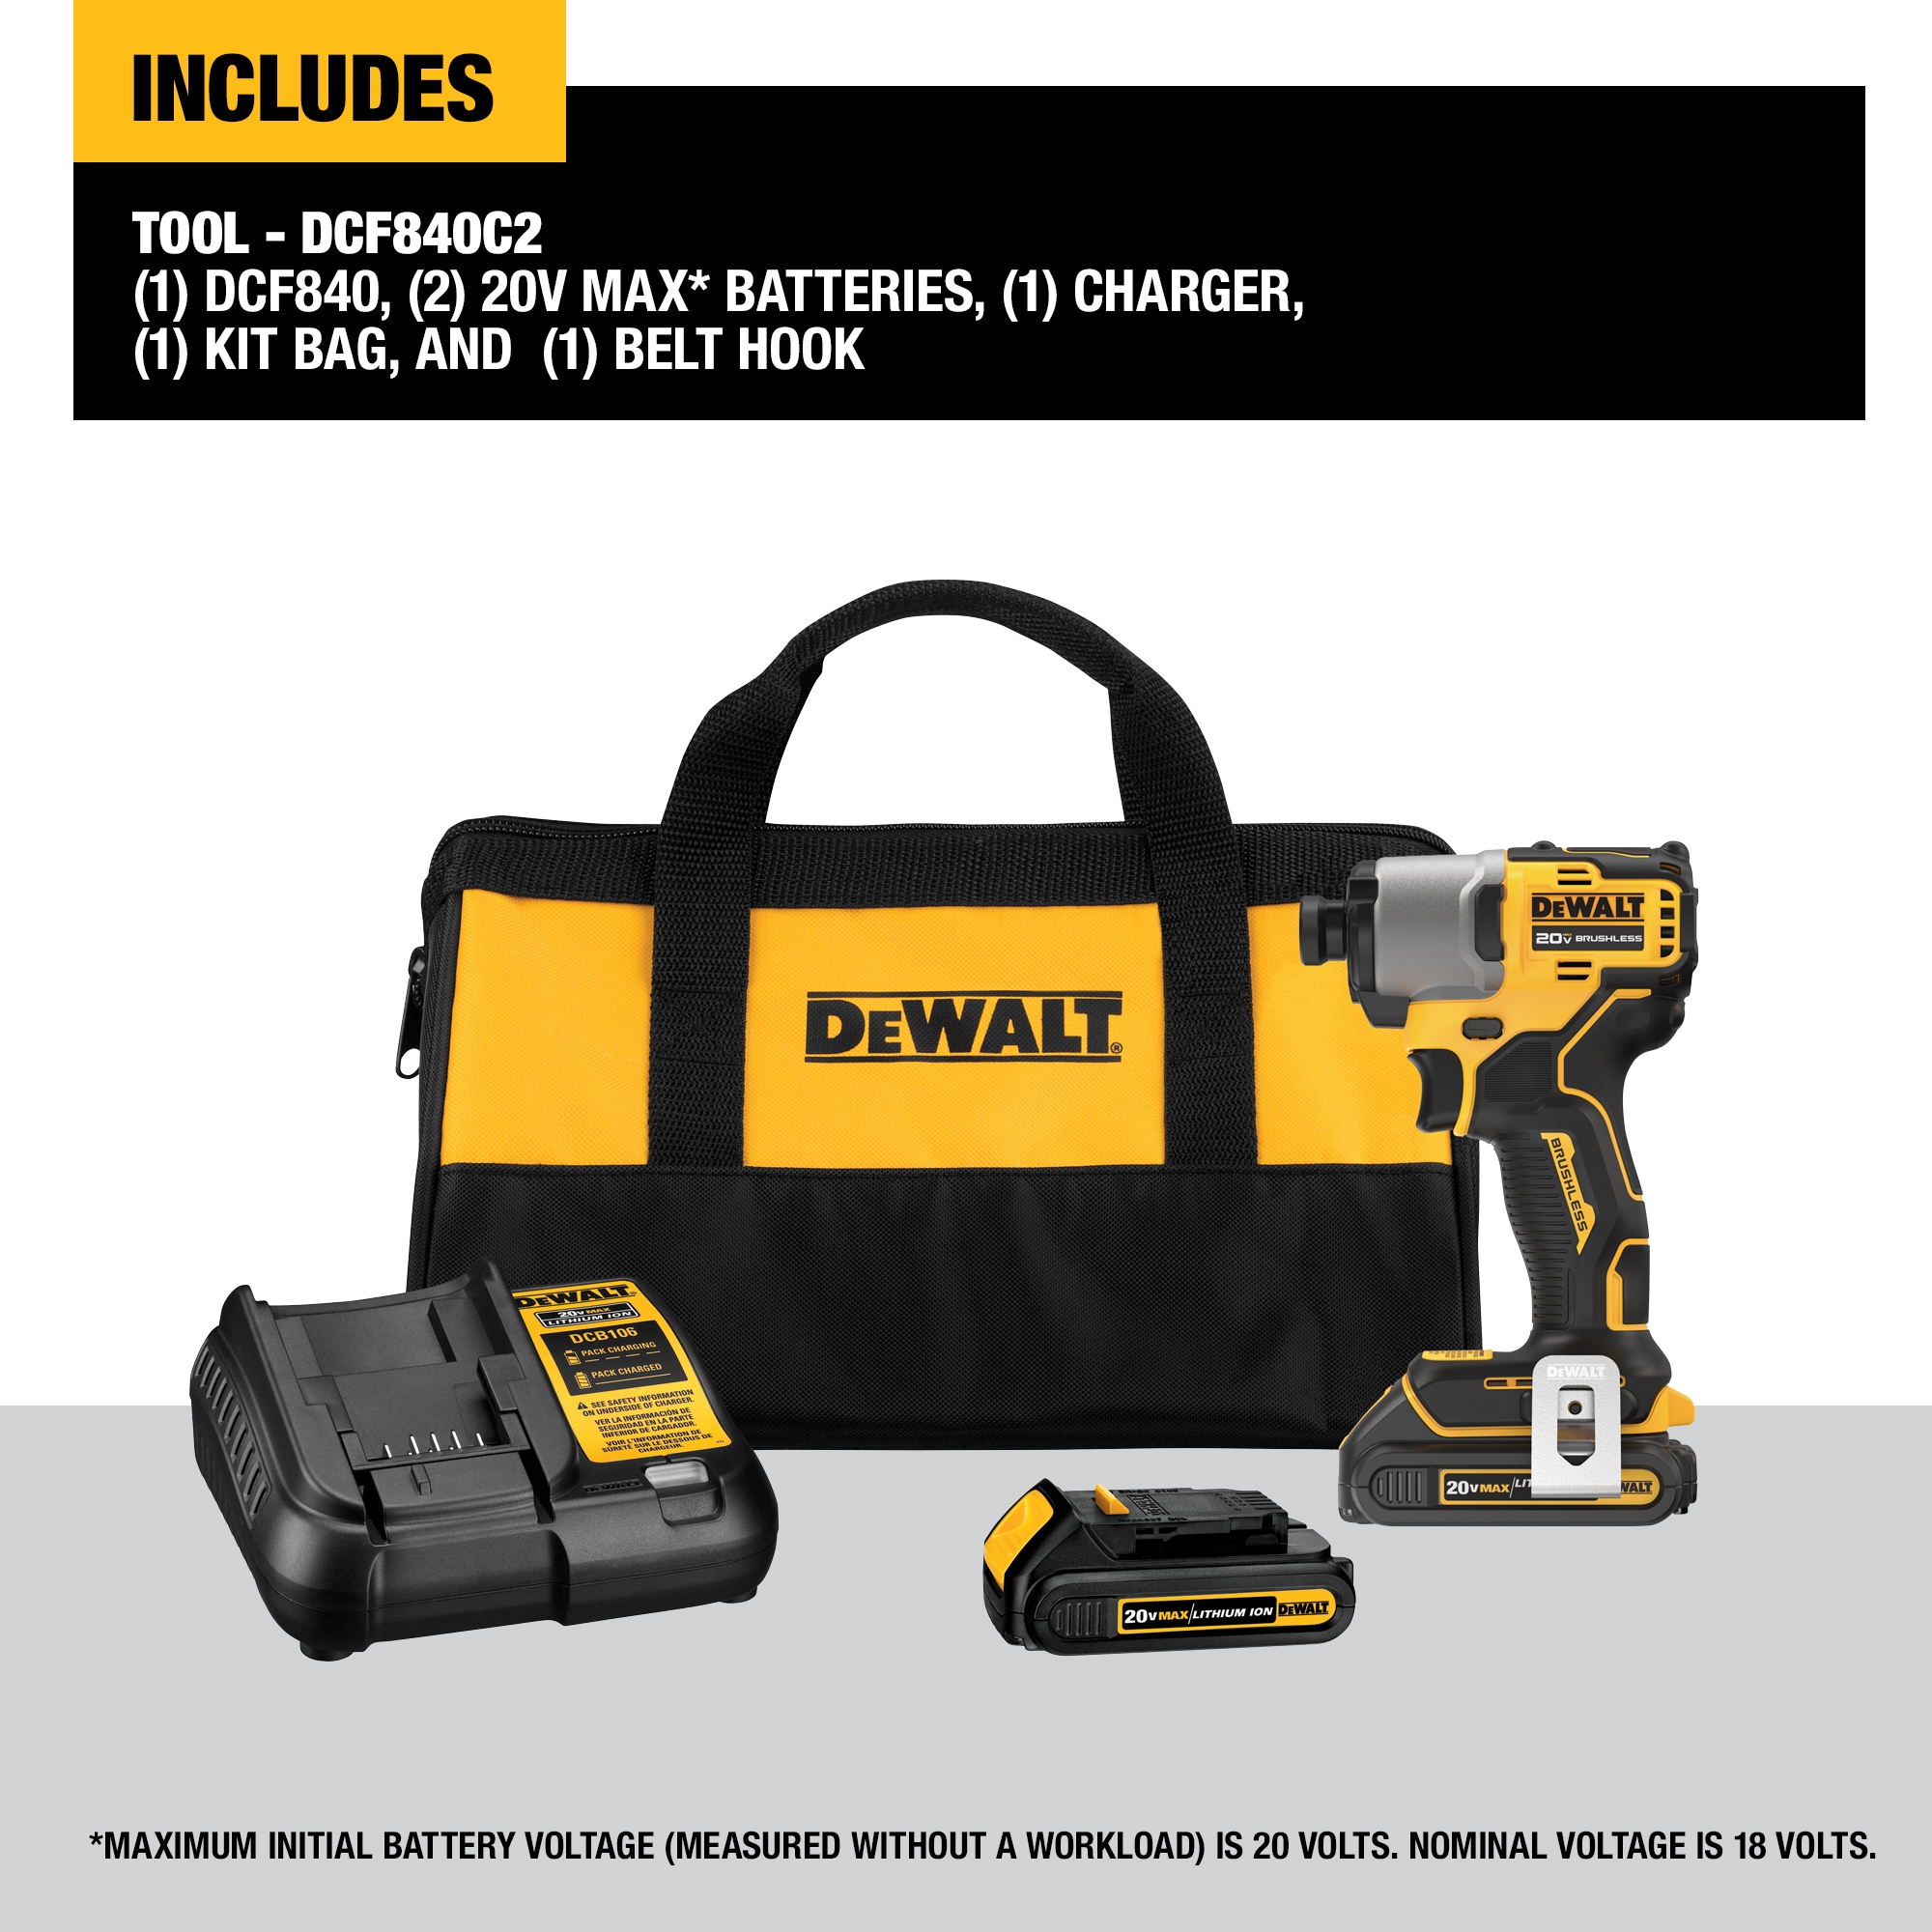 Shop DEWALT Impact Ready Right Angle Drill Attachment & Brushless